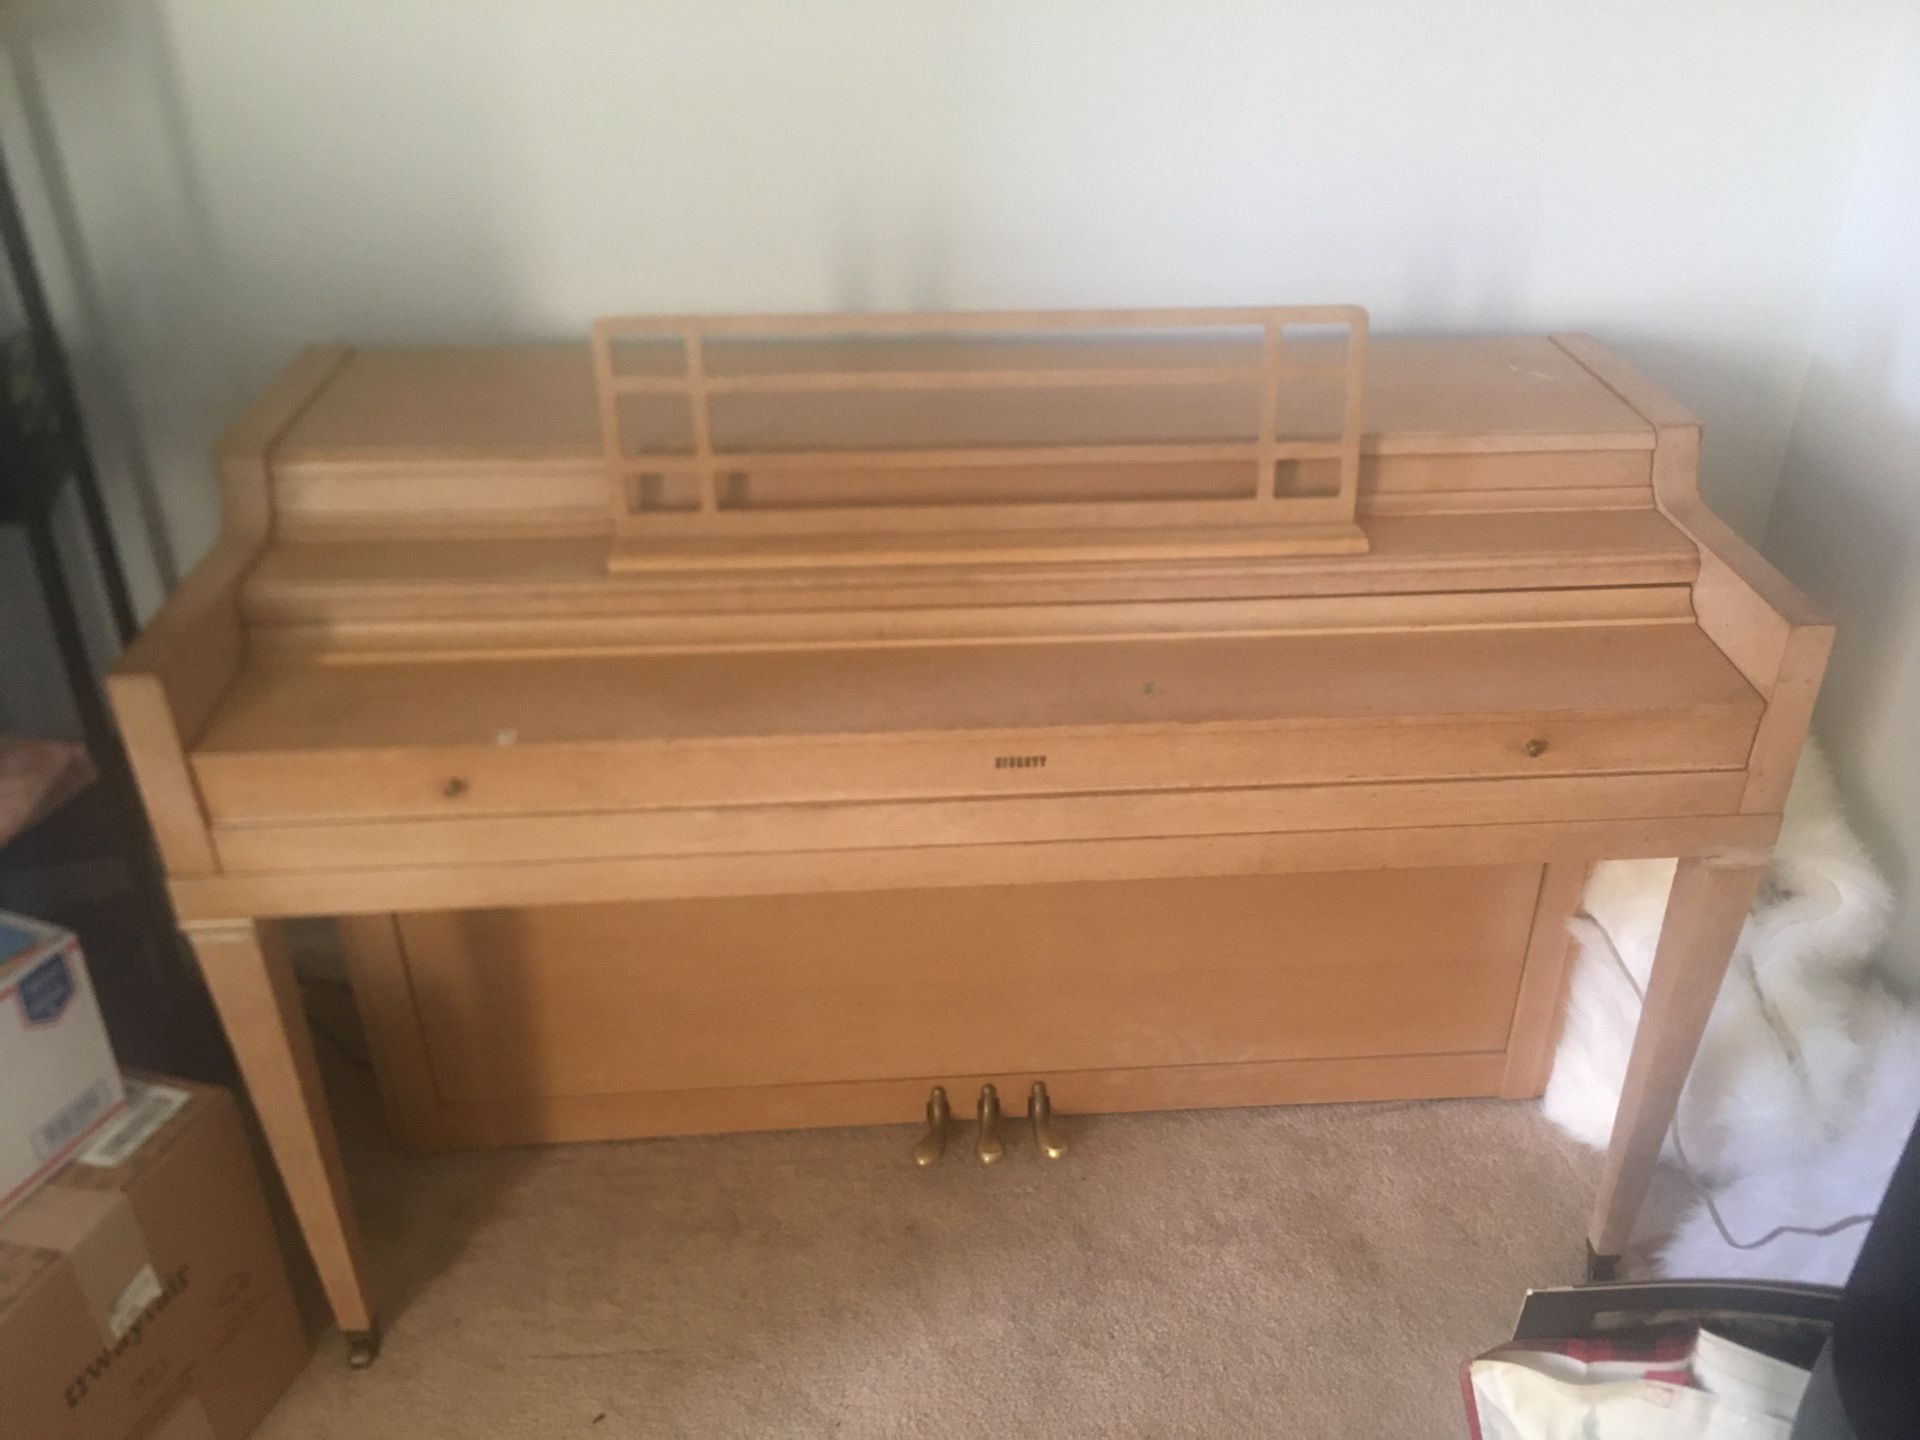 Upright piano available for free